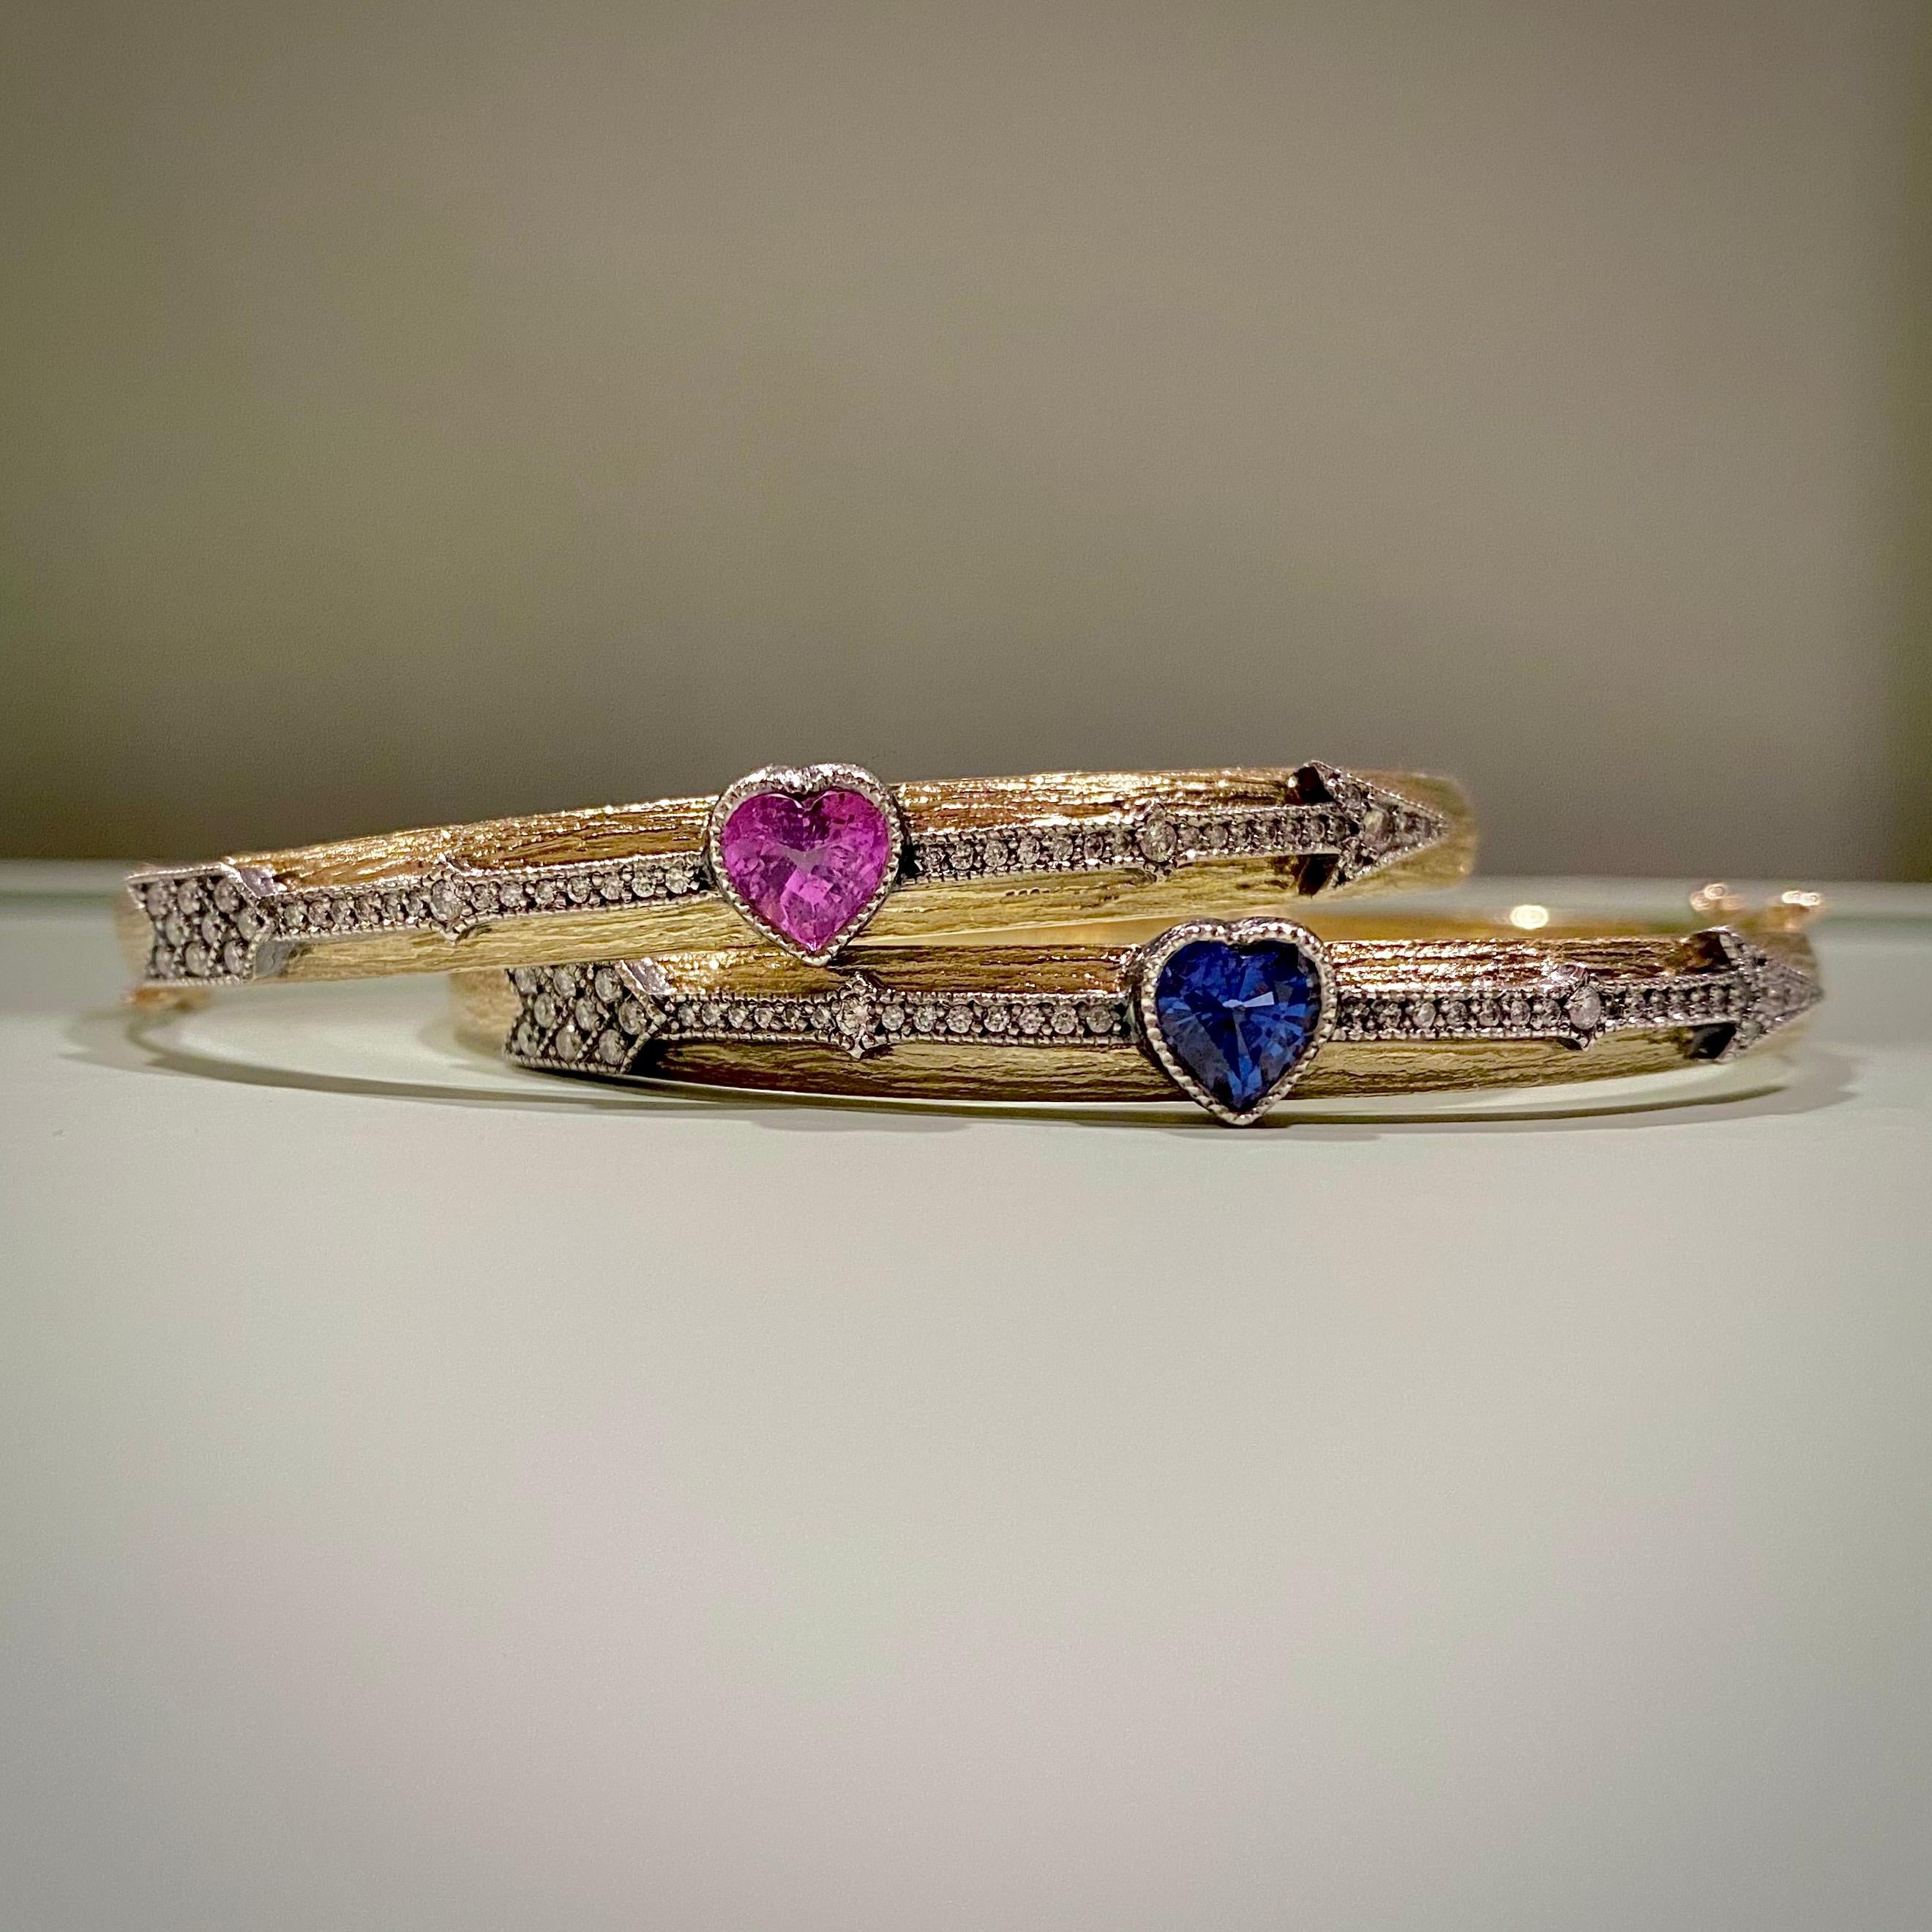 Cupids Arrow 18k Gold Bracelet with Sapphire and Diamonds In New Condition For Sale In Sherman Oaks, CA